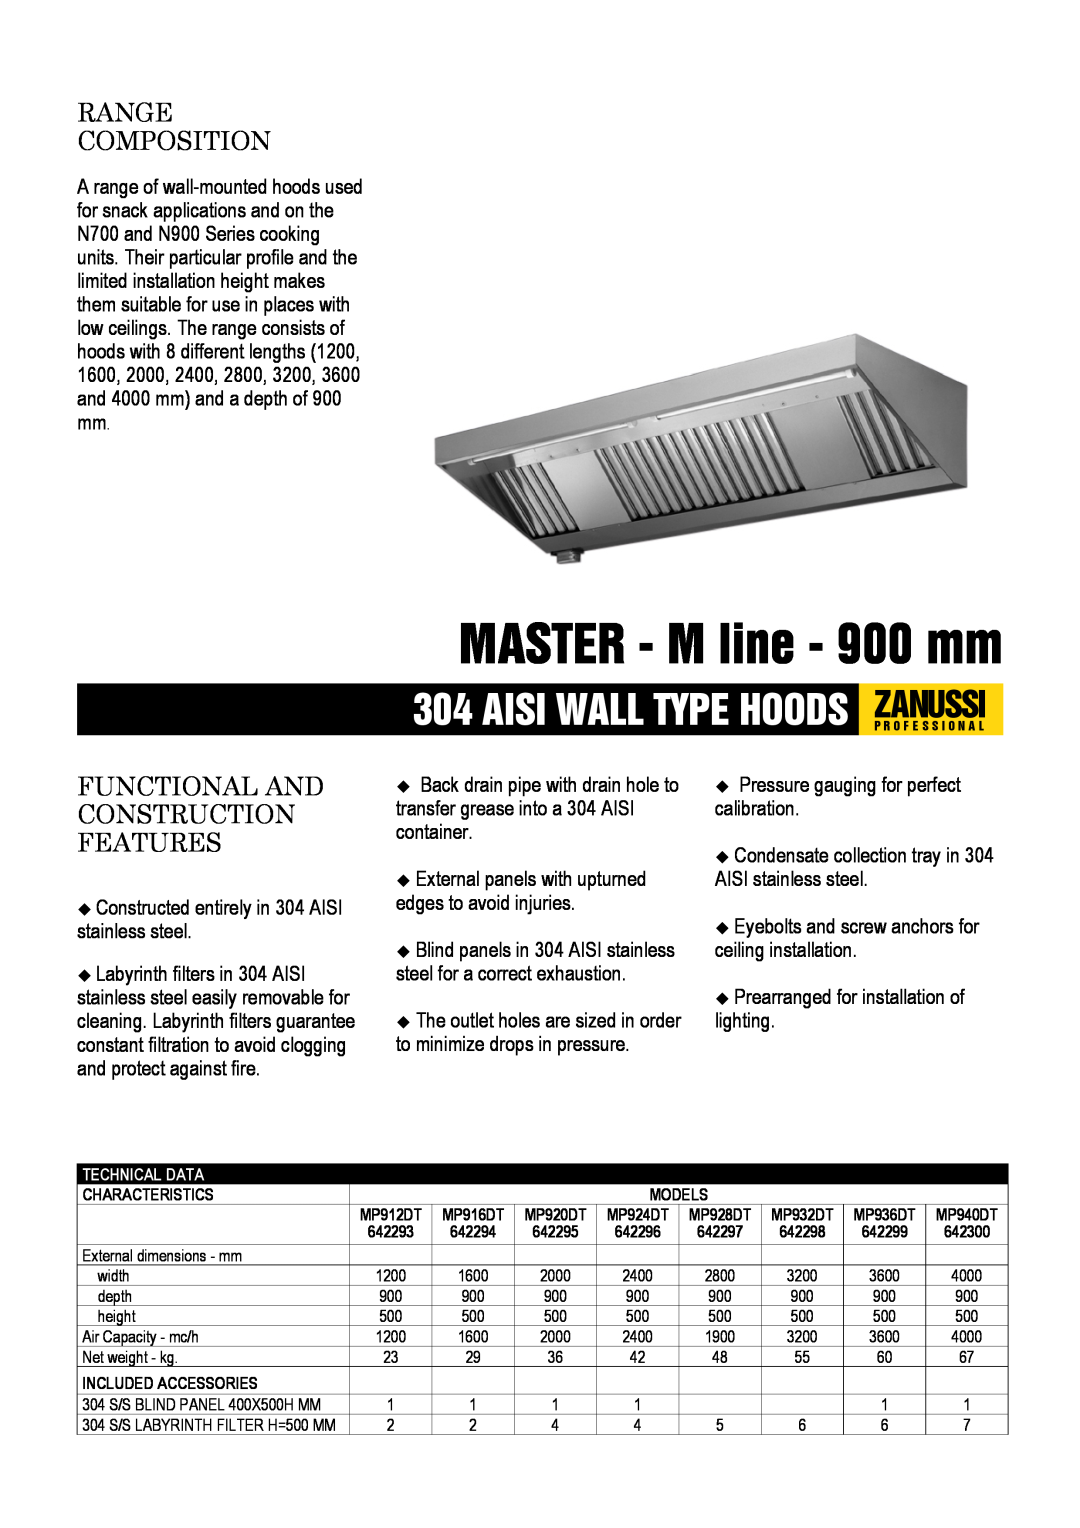 Zanussi 642294, 642295, 642300 dimensions MASTER - M line - 900 mm, Range Composition, Functional And Construction Features 